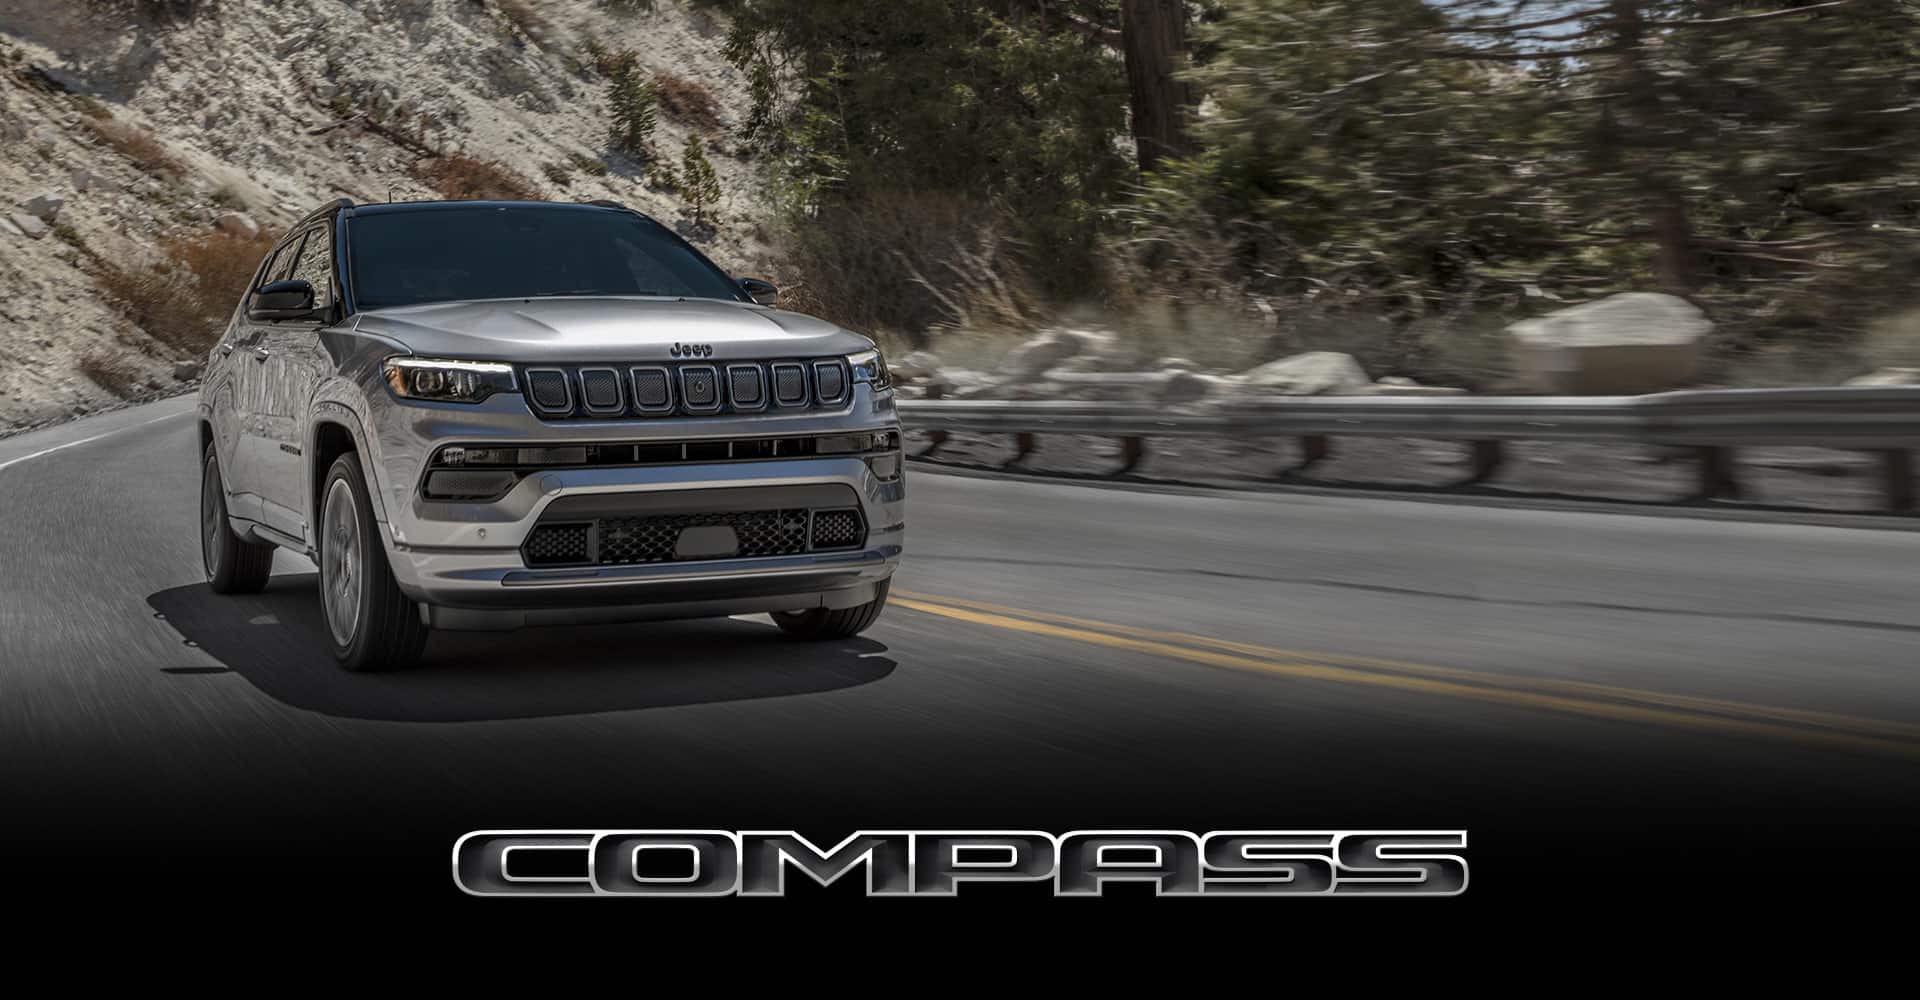 The 2022 Jeep Compass High Altitude being driven on a mountain road with the background blurred to indicate the vehicle's speed.